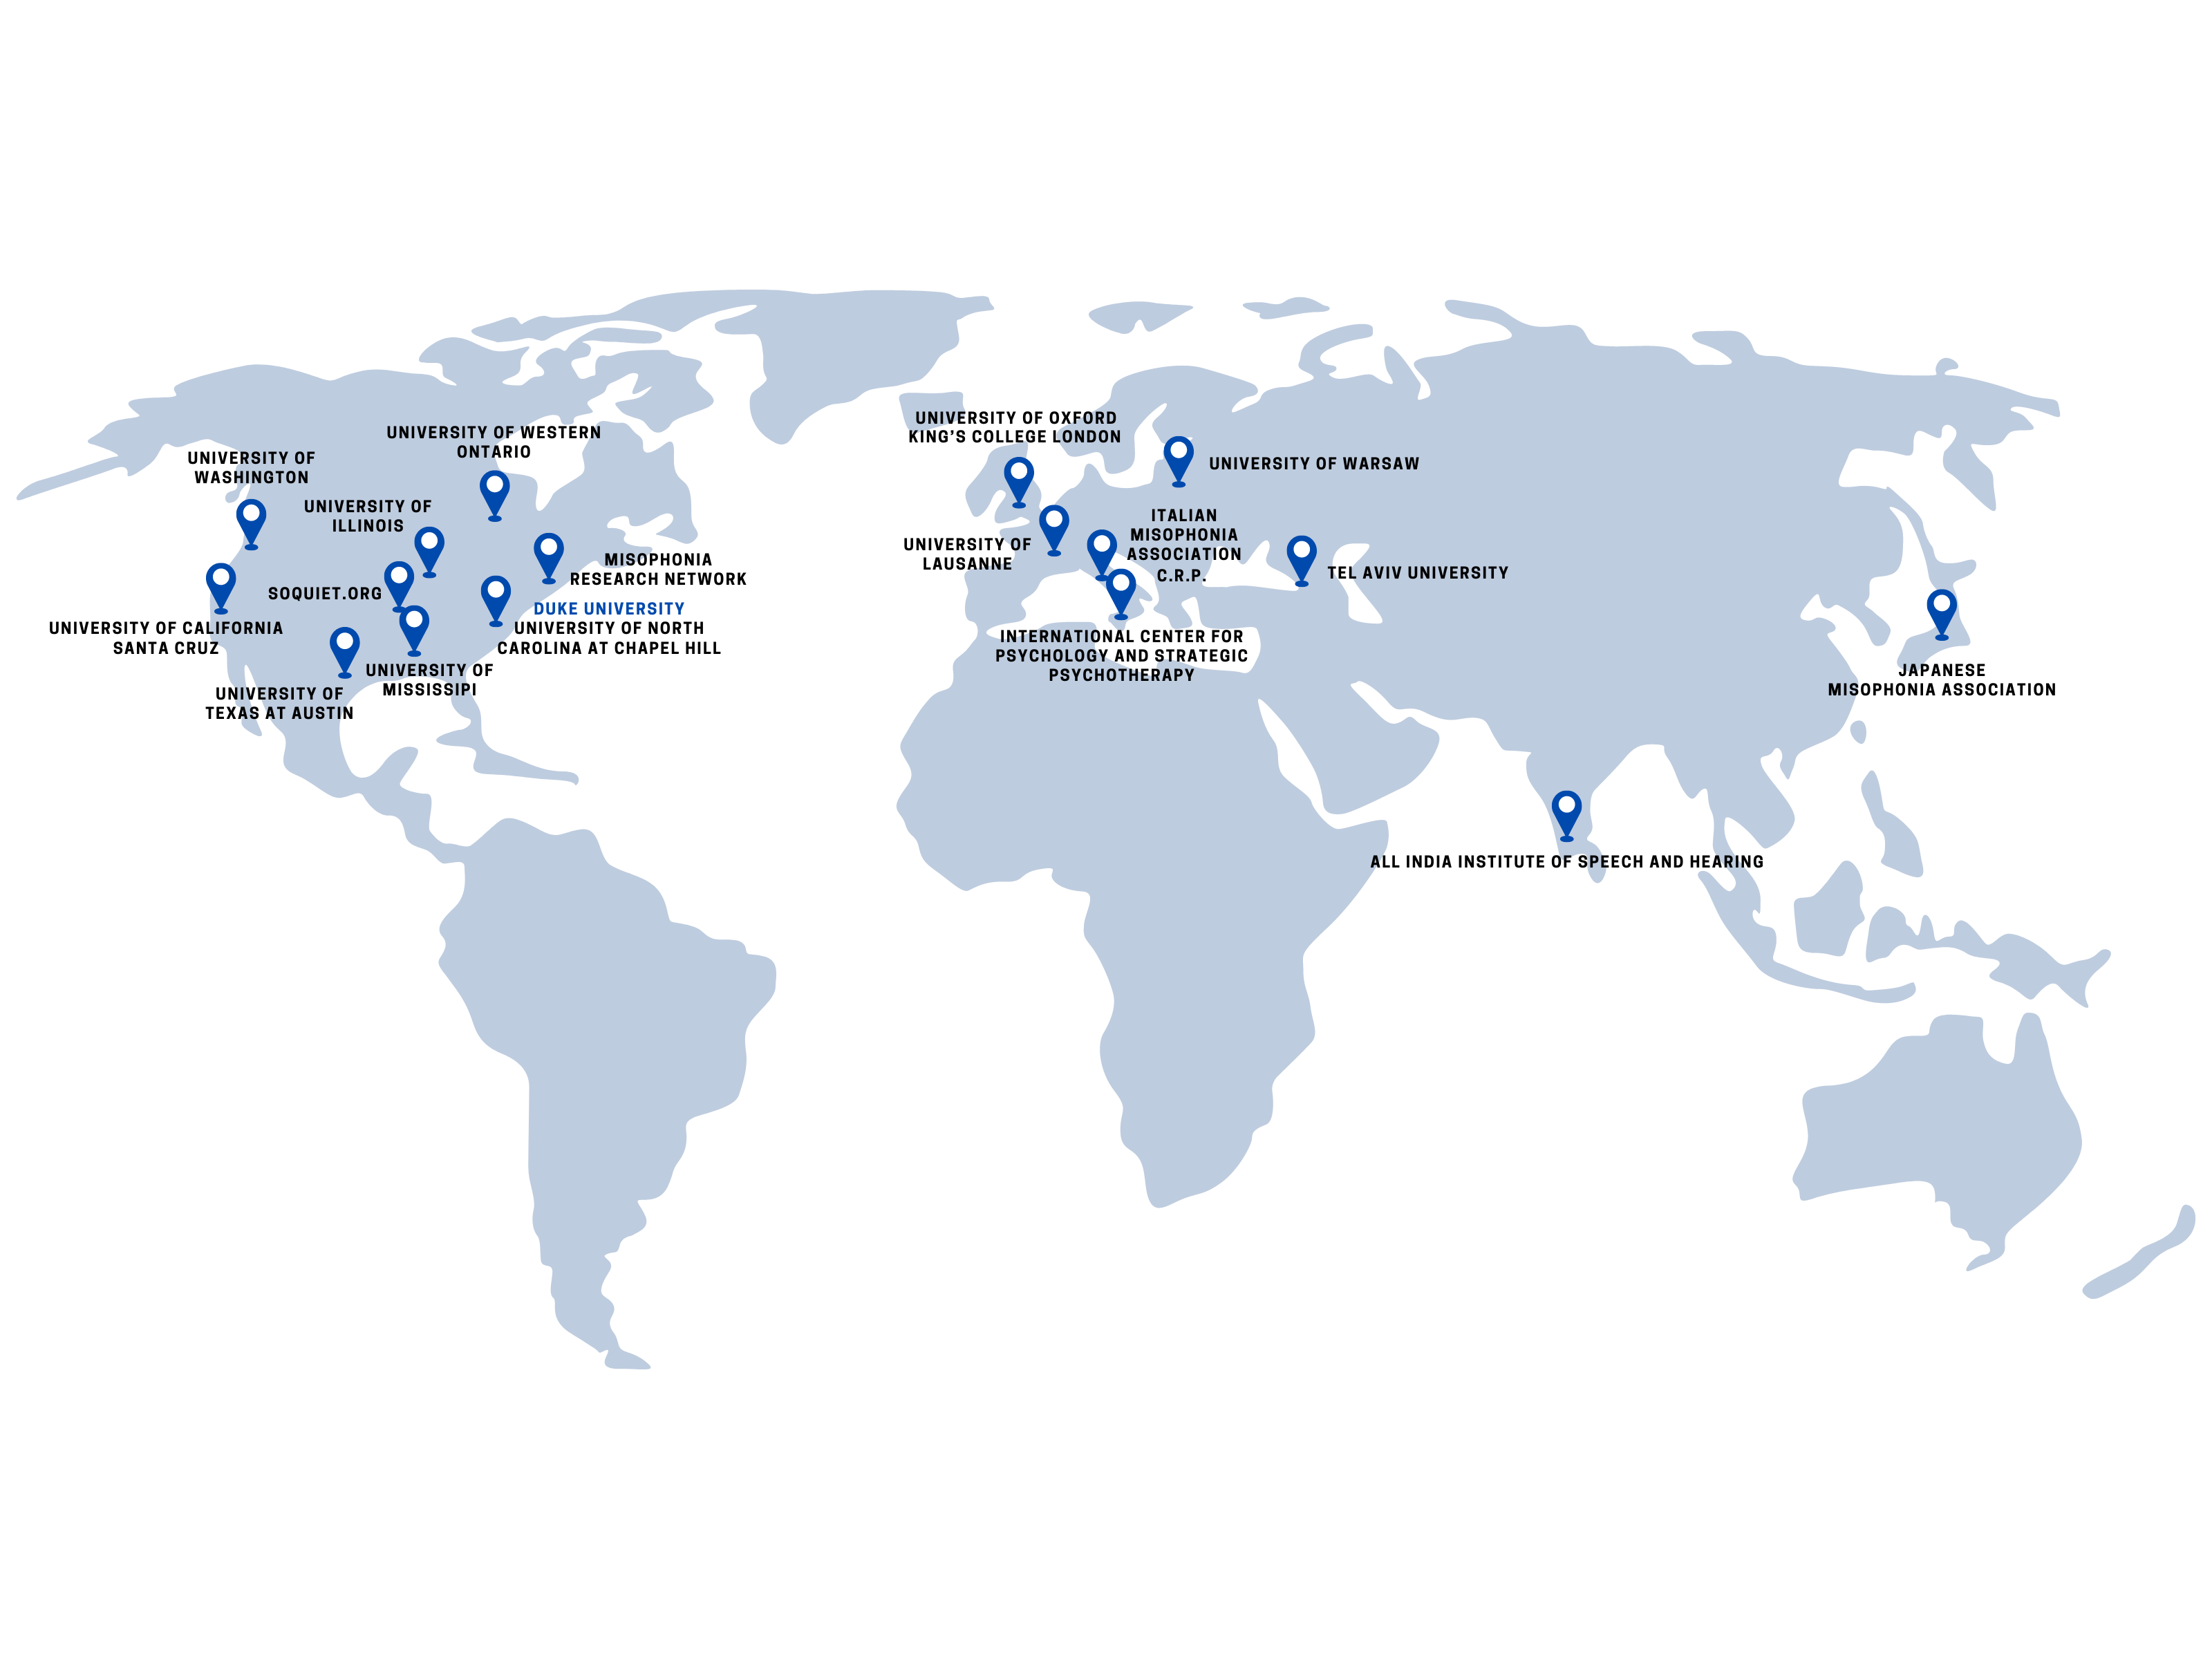 Map of collaborations